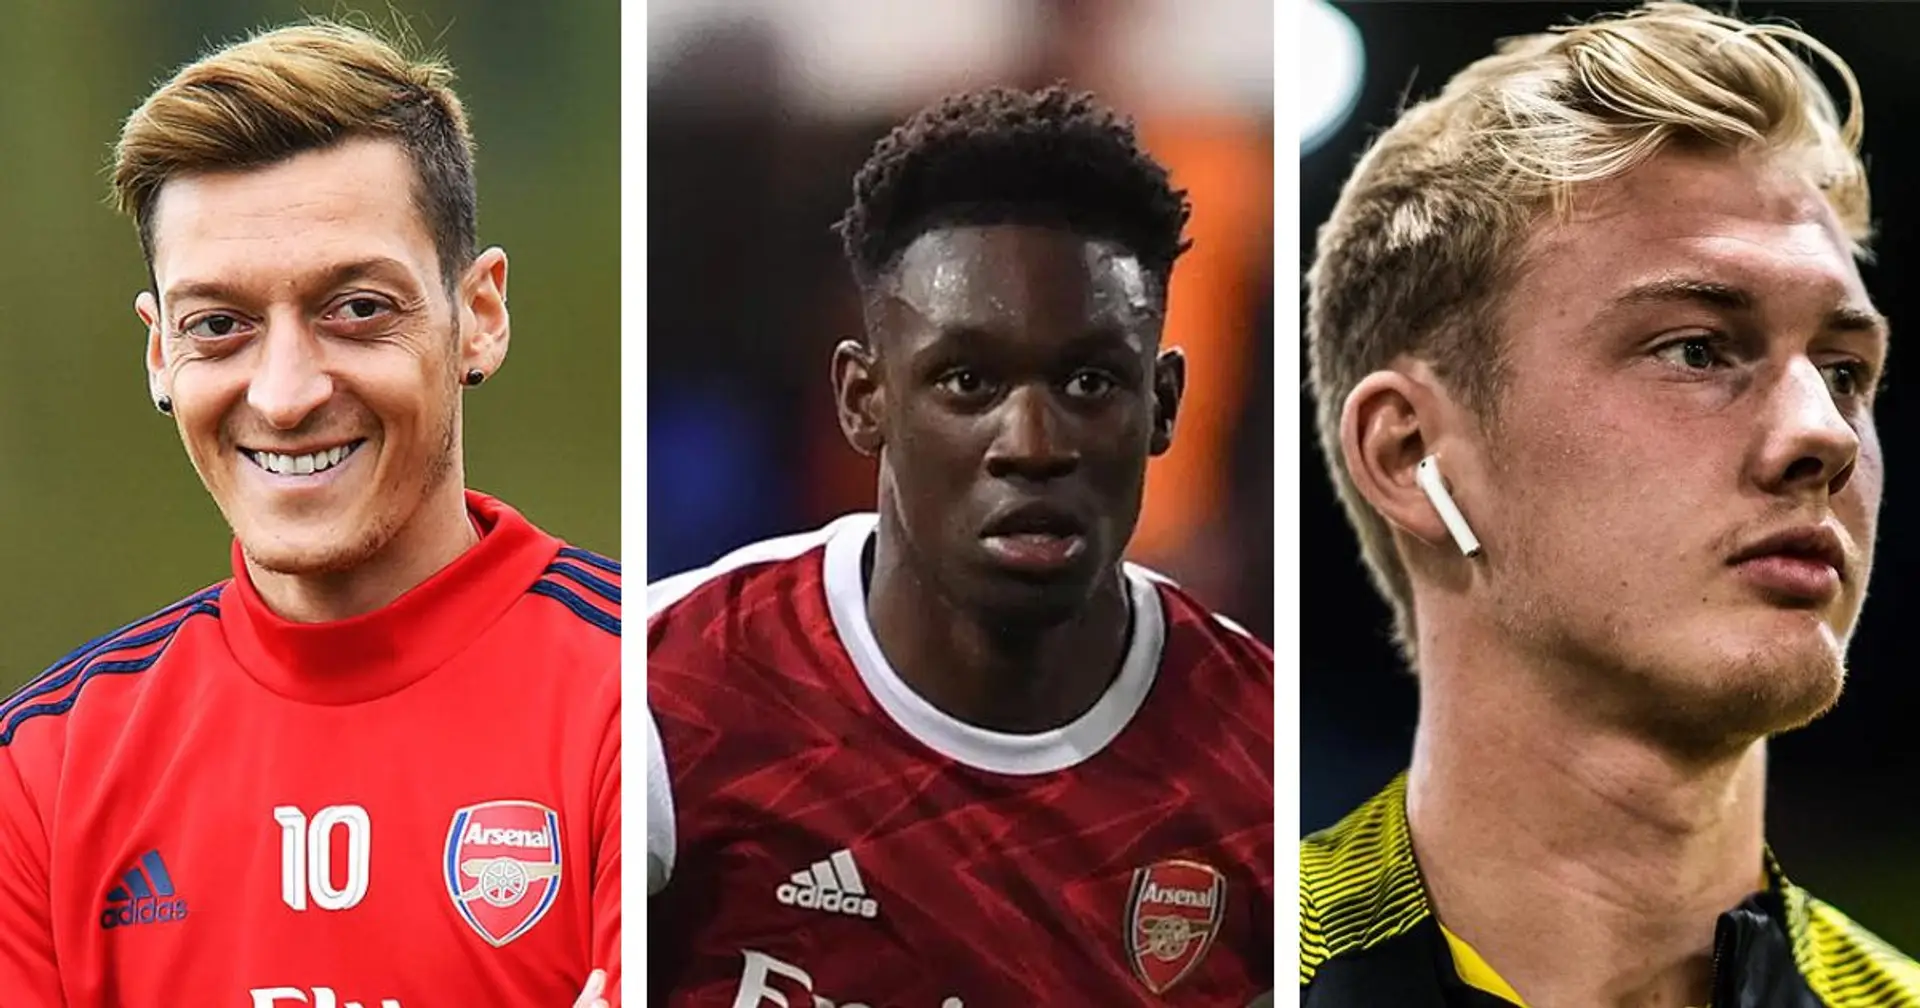 Latest on Ozil, Brandt and 12 more: Arsenal transfer round-up with probability ratings